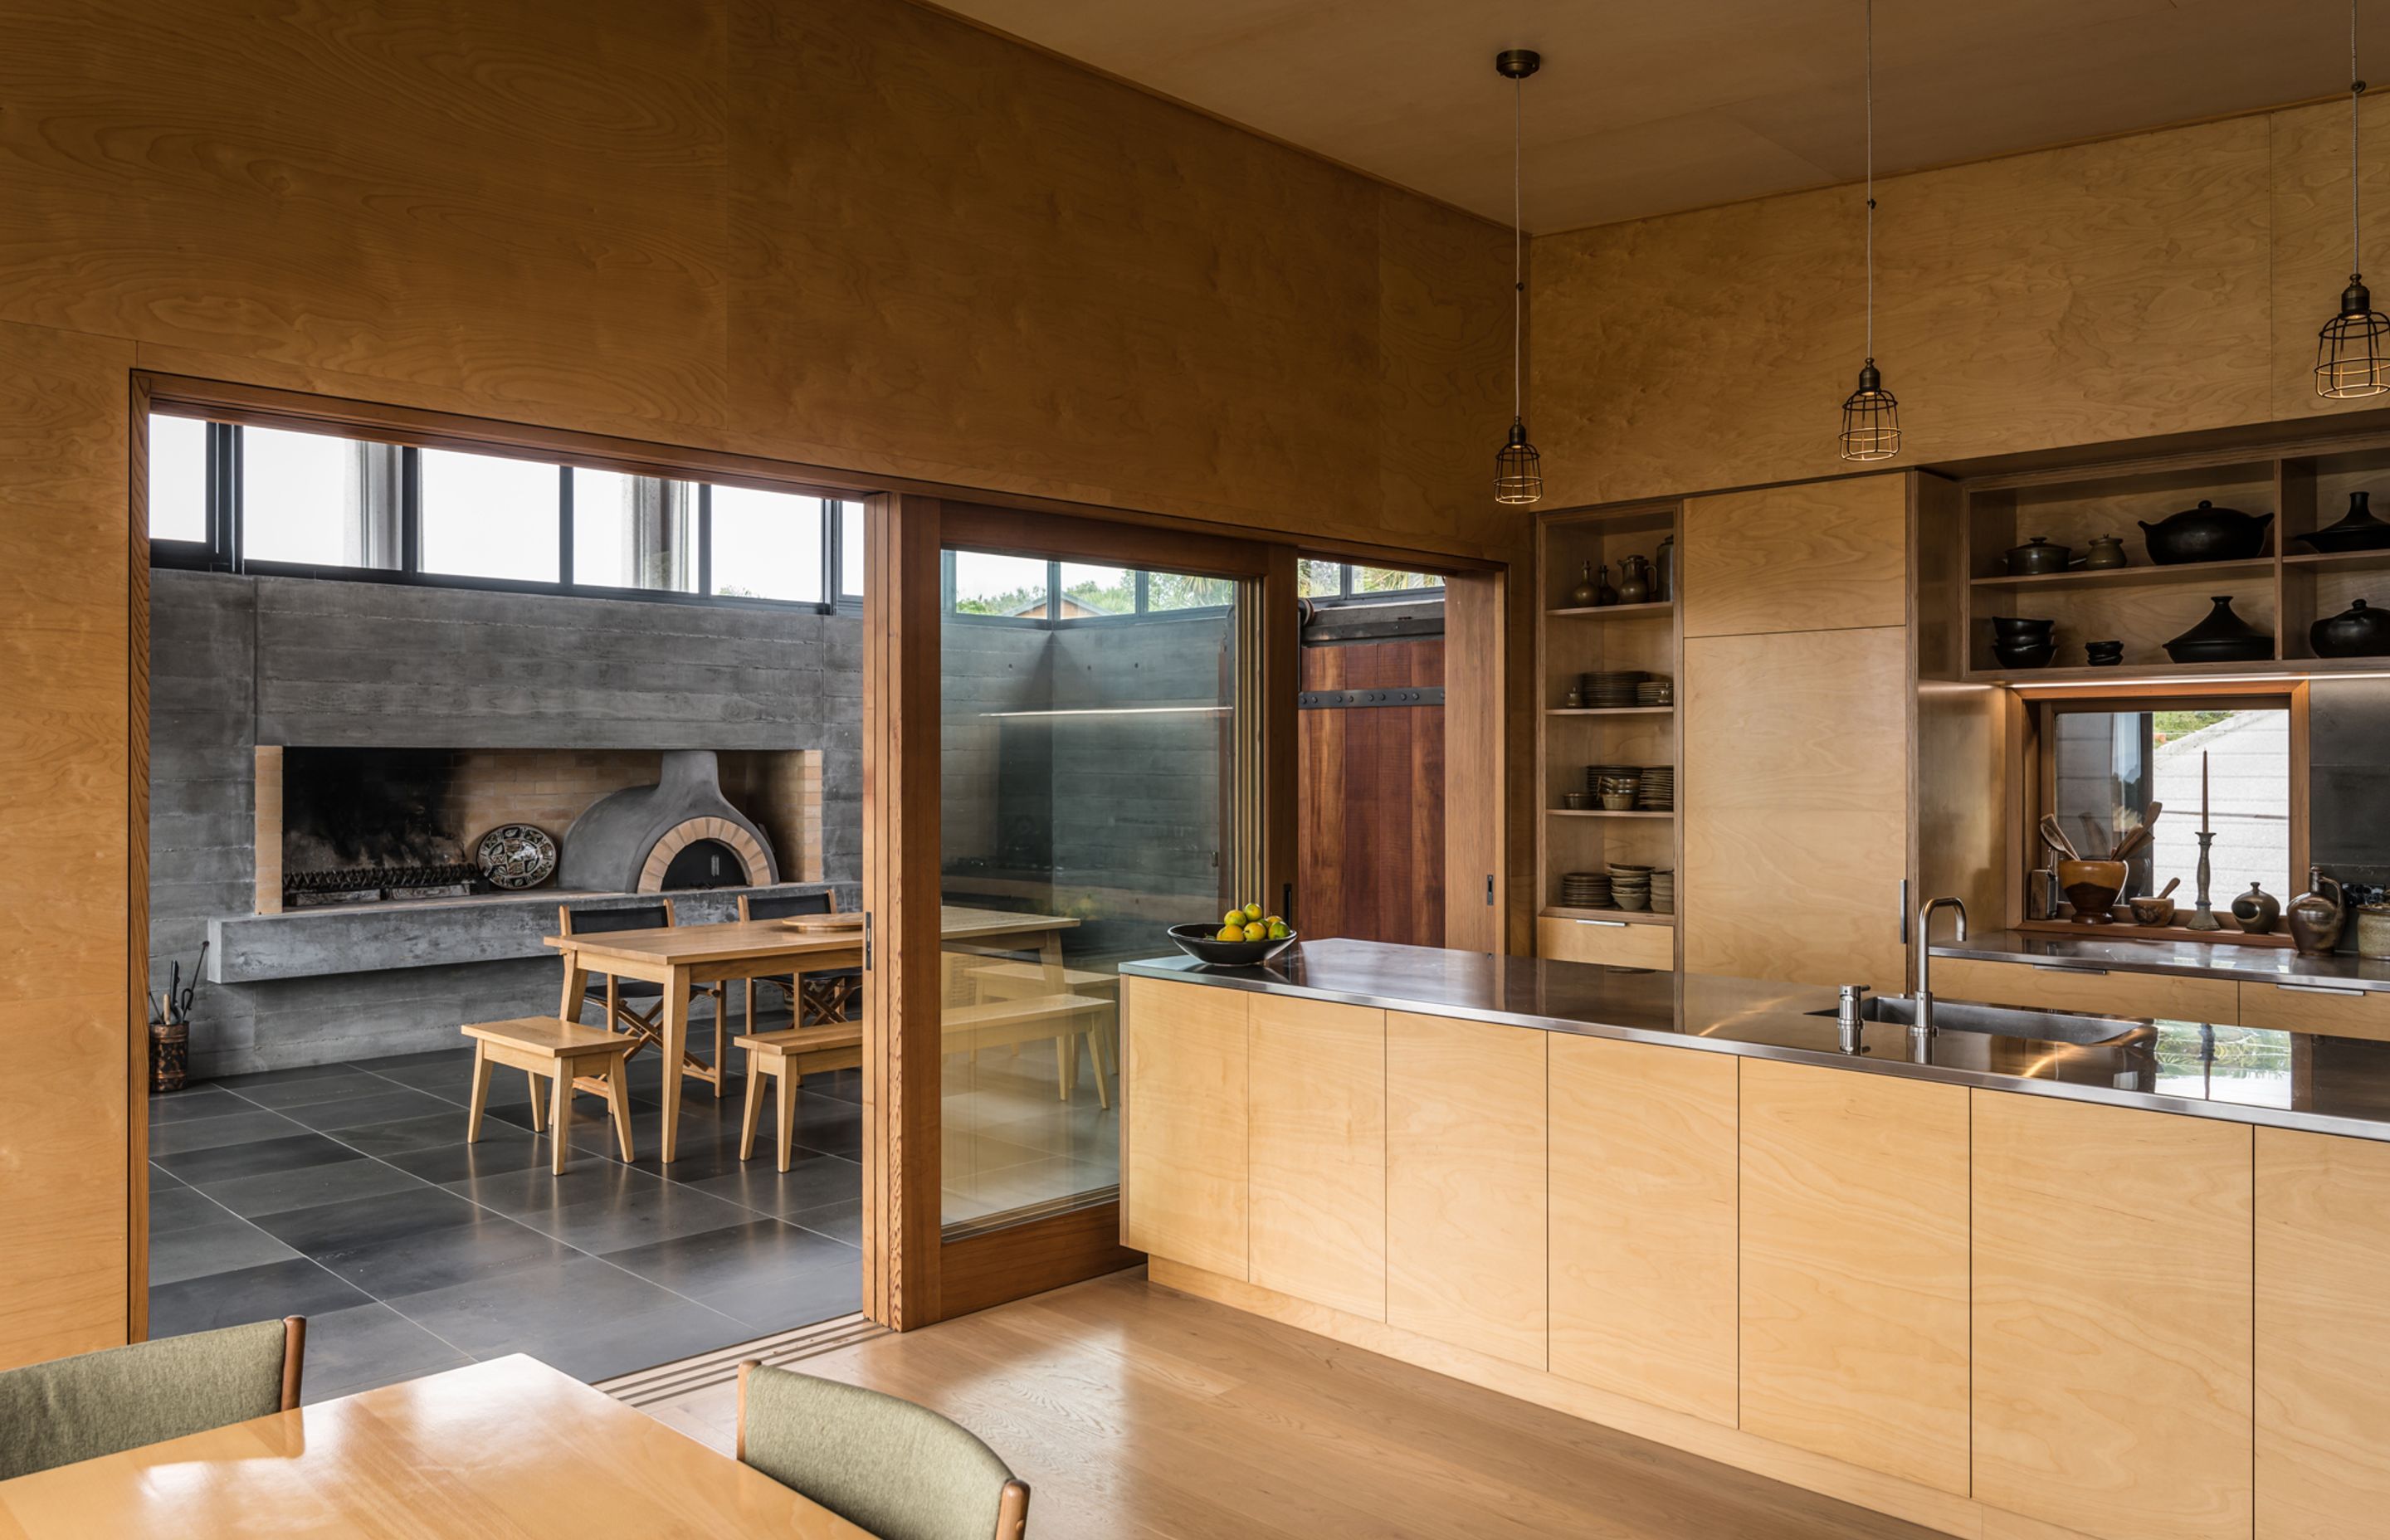 The bespoke plywood kitchen is a smooth and elegant contrast to the textured concrete and tiled floor seen in the entertainment room. Photograph by ArchiPro.